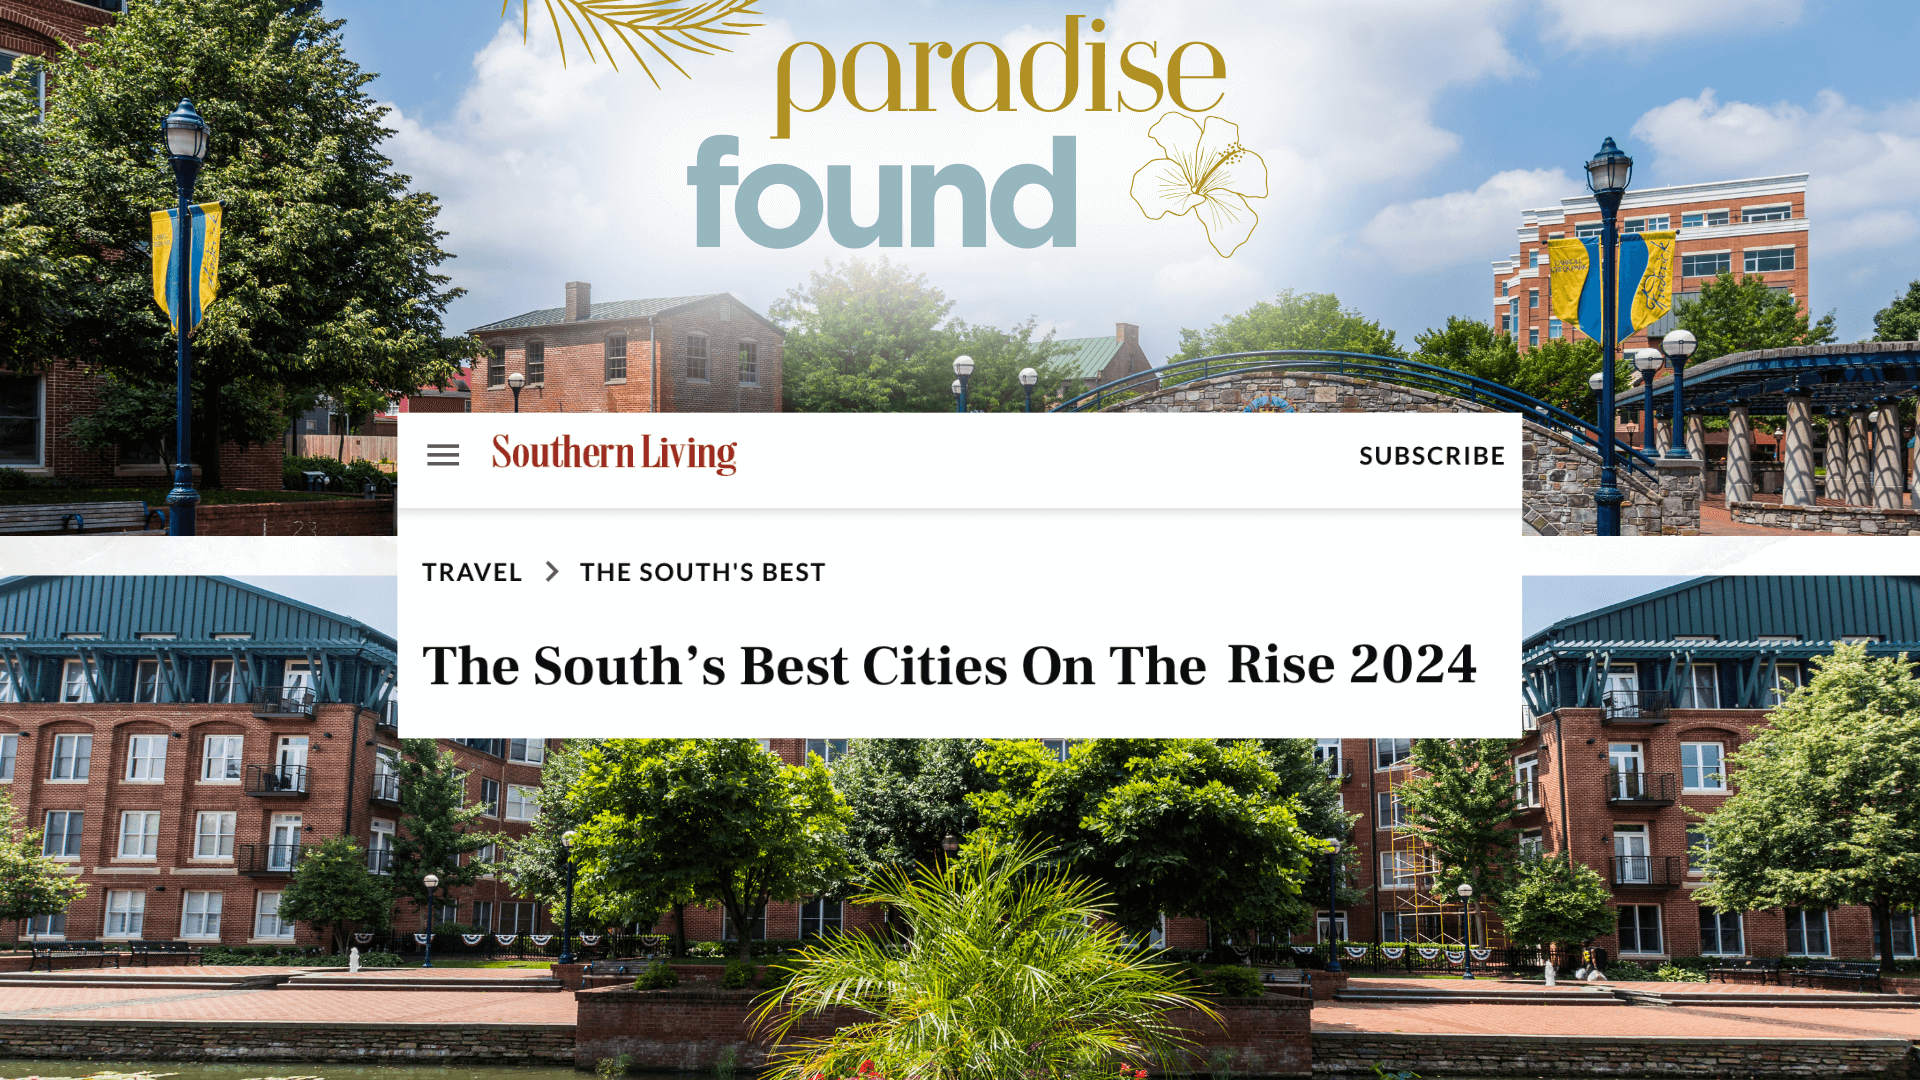 City of Frederick Featured in Southern Living Magazine